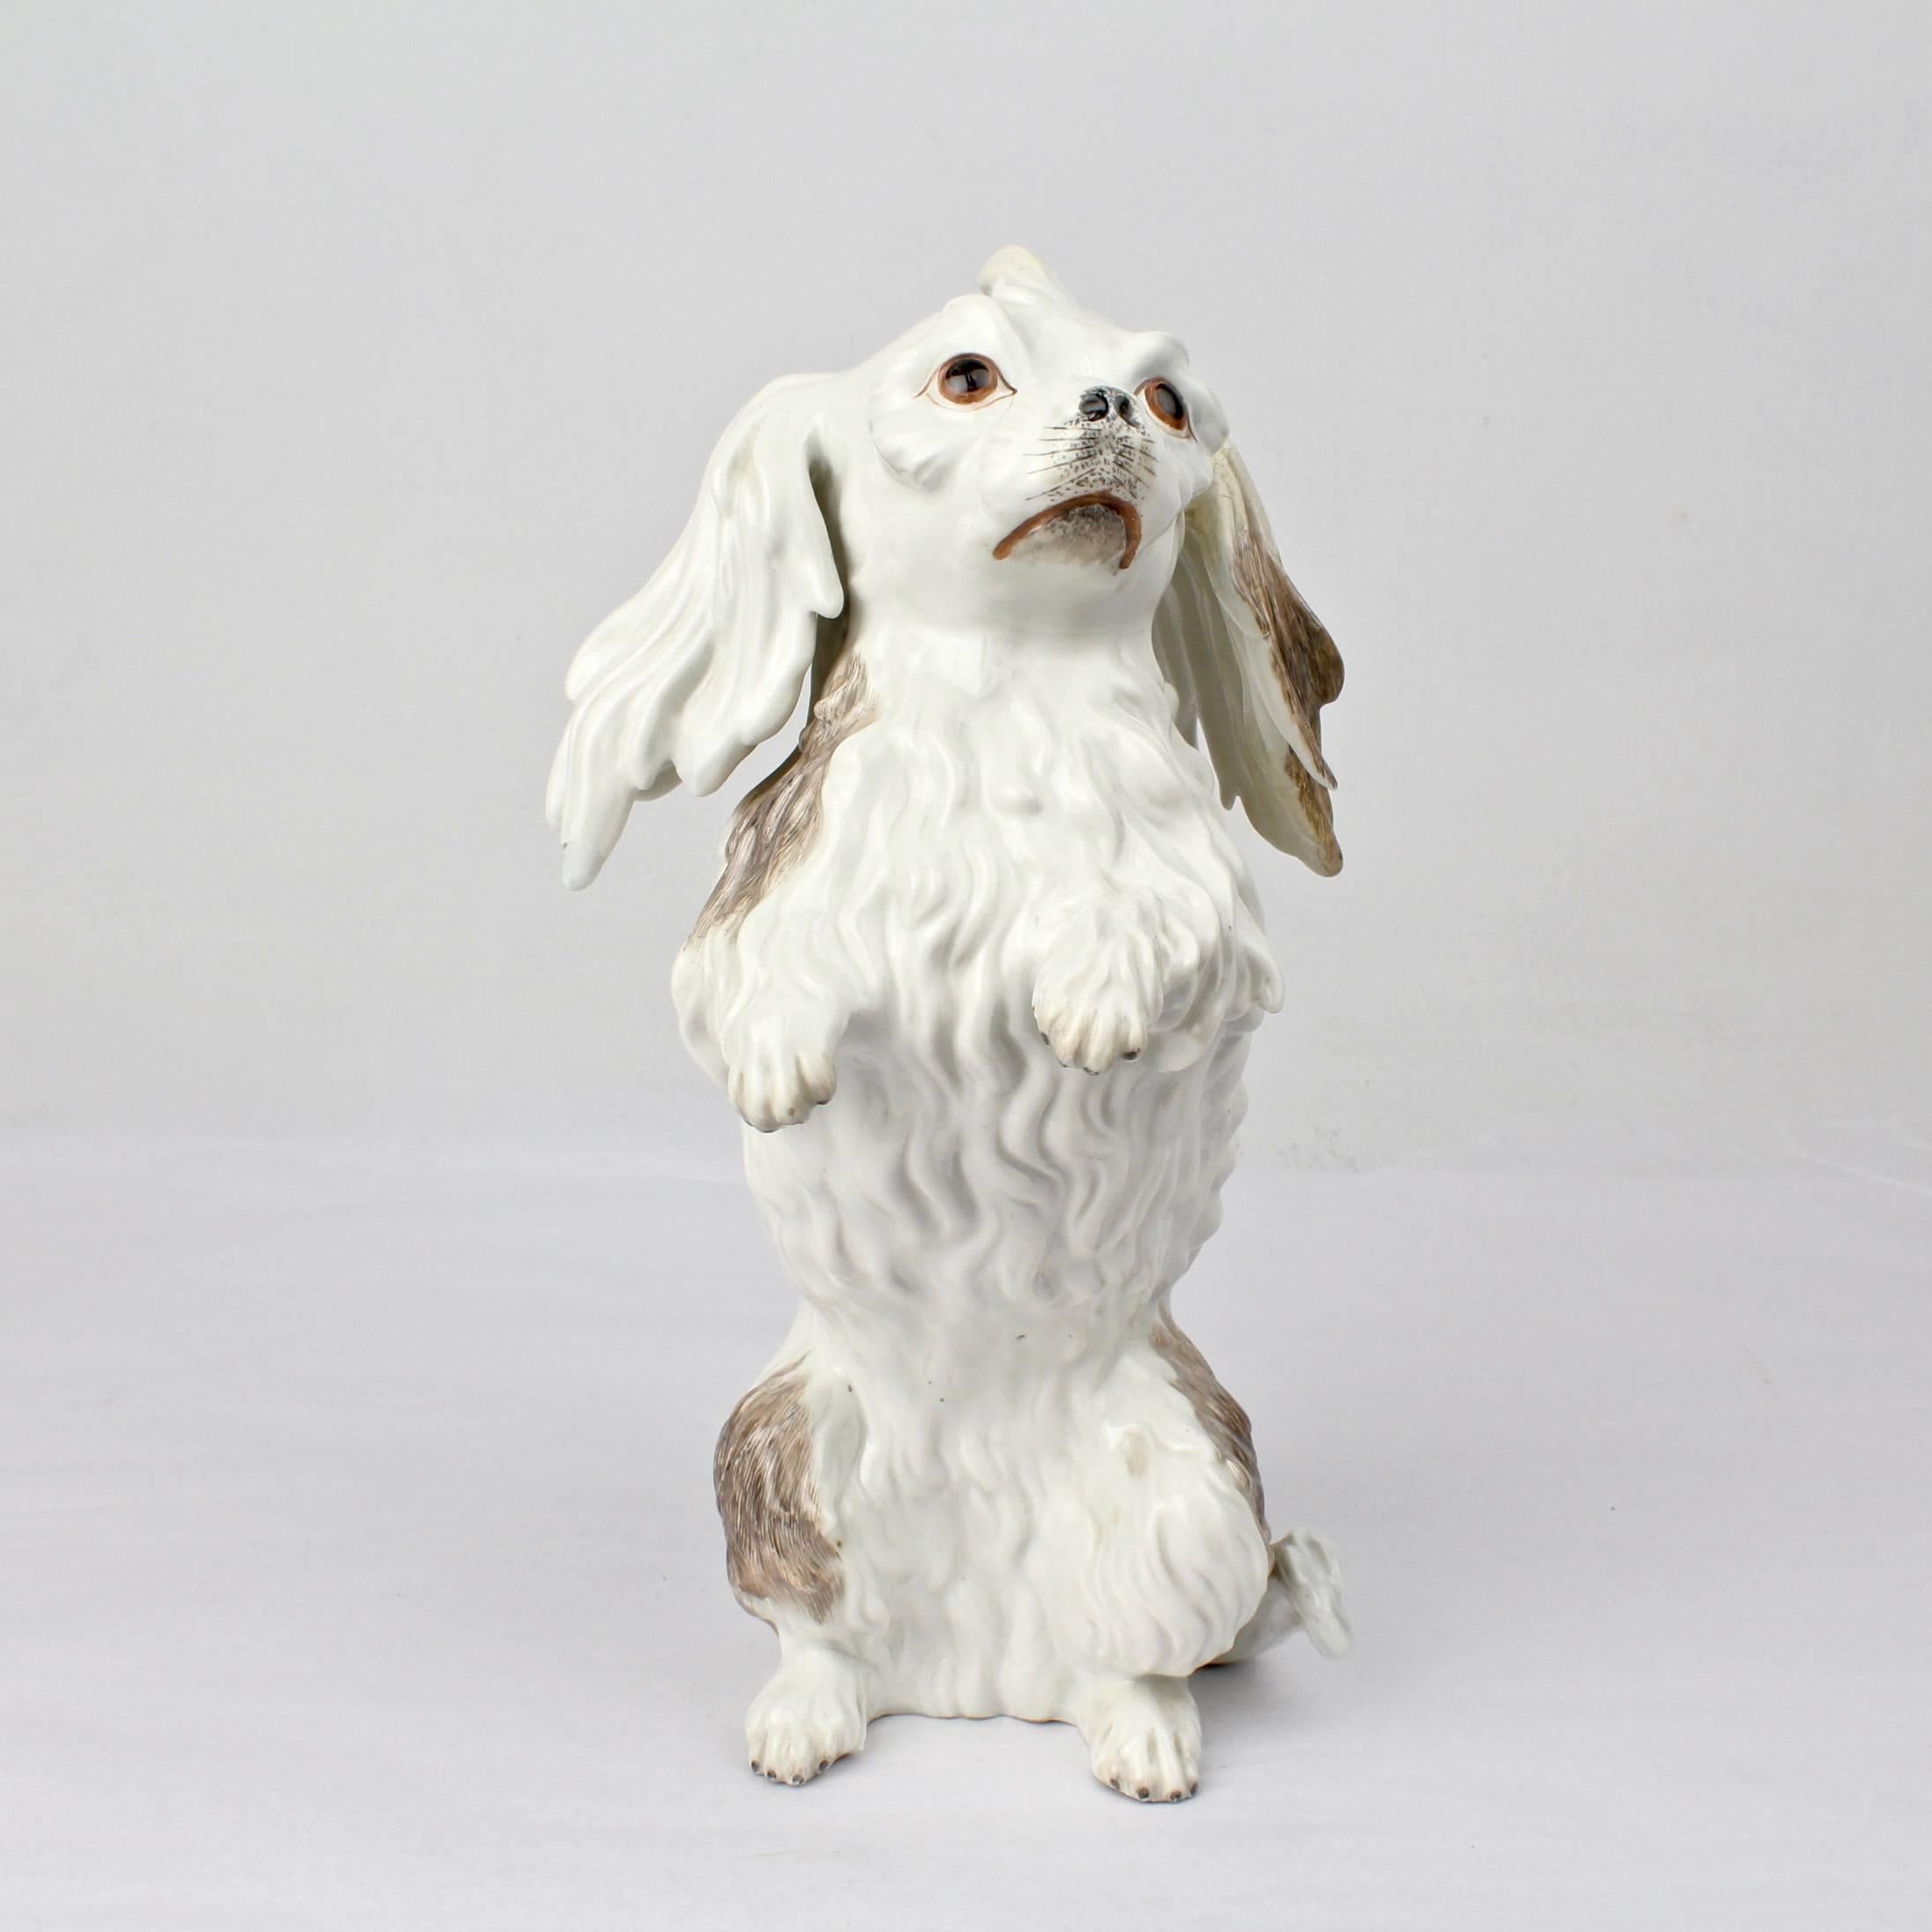 An antique Dresden porcelain figurine of the seated 'Bolognese Dog'.

A form made famous by the brilliant Meissen modeler Johann Kaendler in the 18th century. This model is a 19th century rendition true to this original design. 

Height: circa